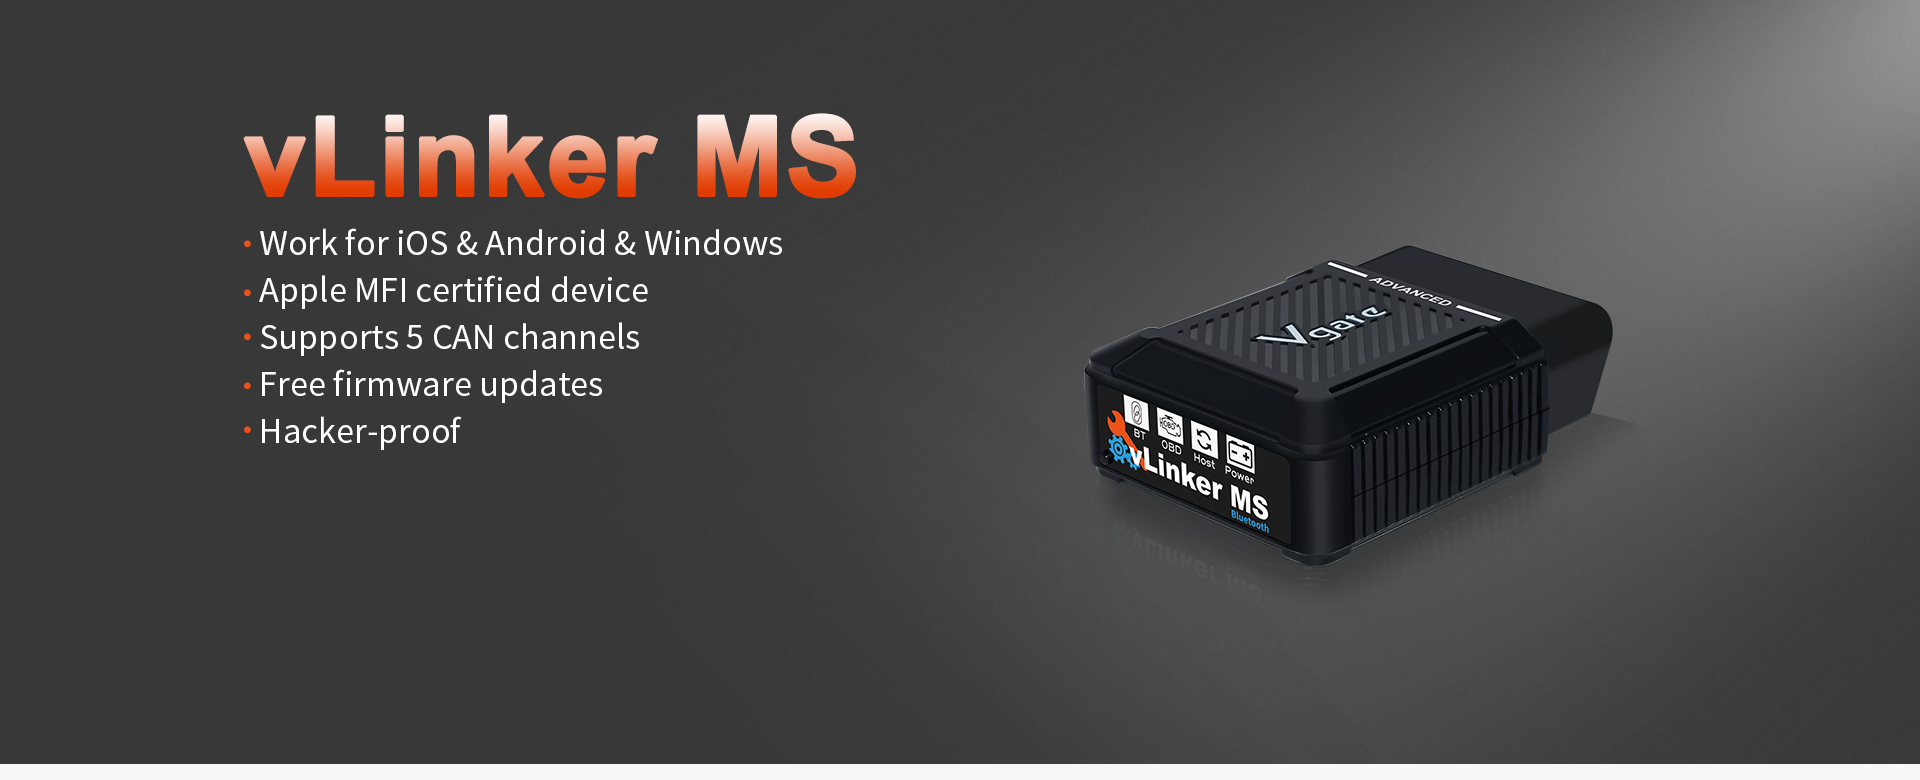 Vgate vLinker MS Bluetooth (Coming soon for sale)